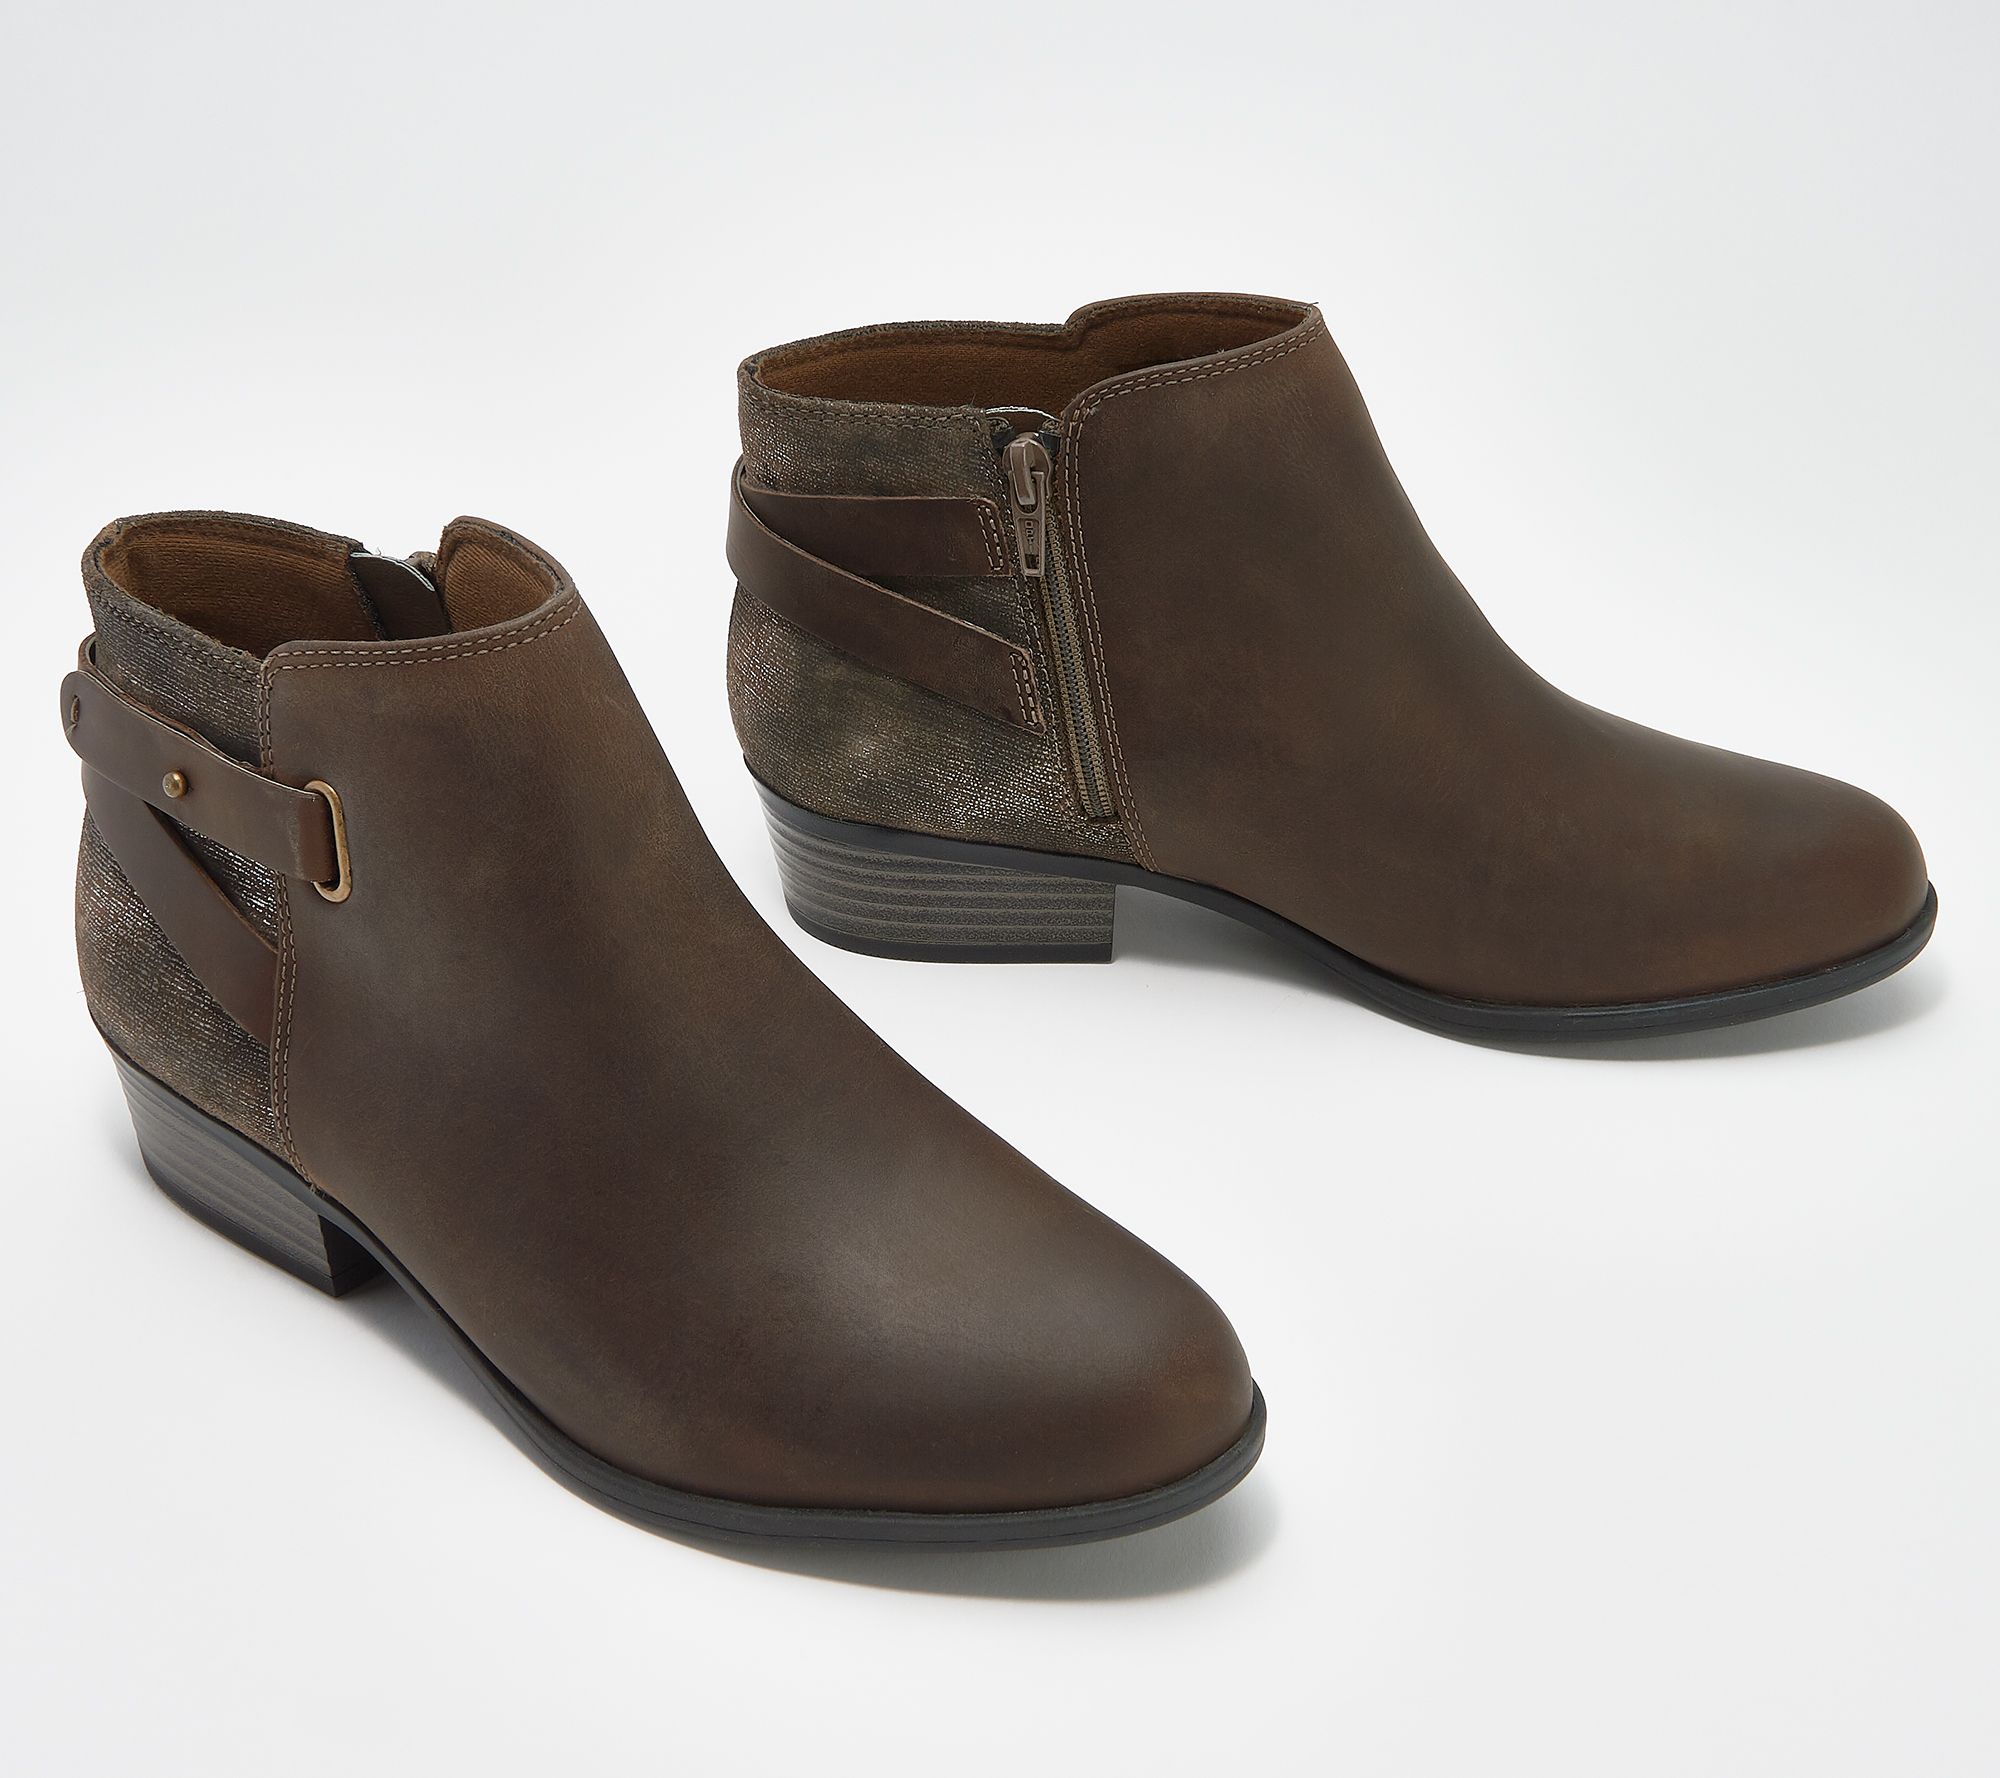 qvc clarks shoes clearance